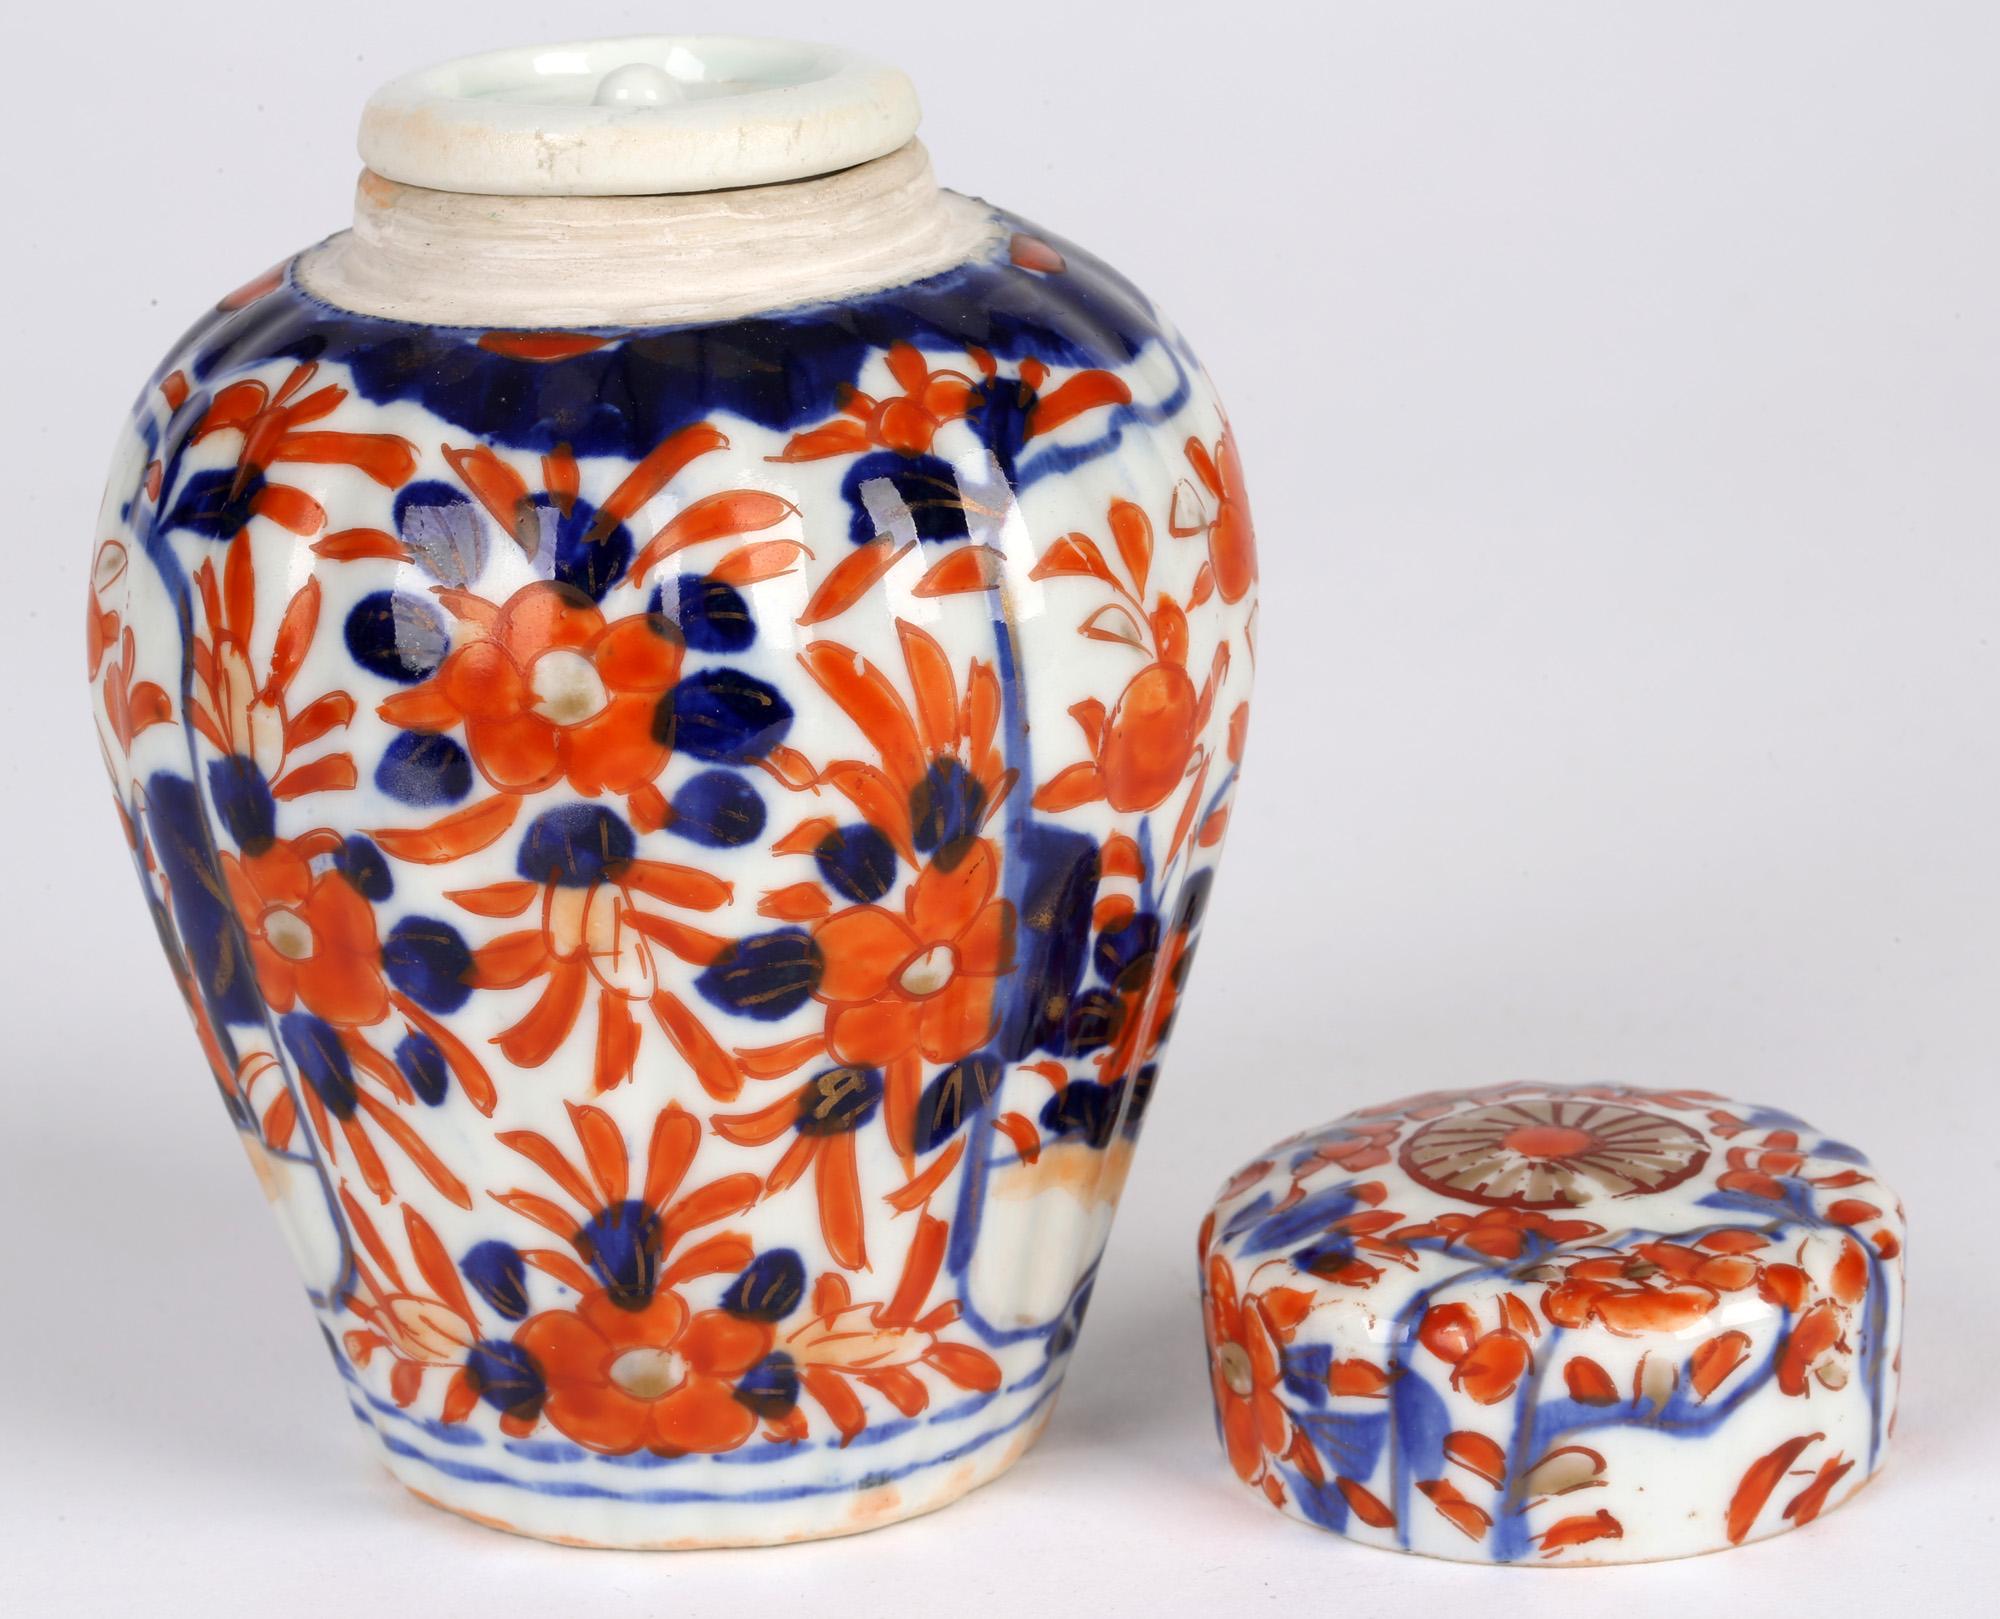 A stunning Japanese Meiji period porcelain Imari pattern lidded tea caddy or ginger jar dating from circa 1900-1910. The small rounded jar has a ribbed shaped body with its original rounded flat topped cover and secondary glazed inner cover. The